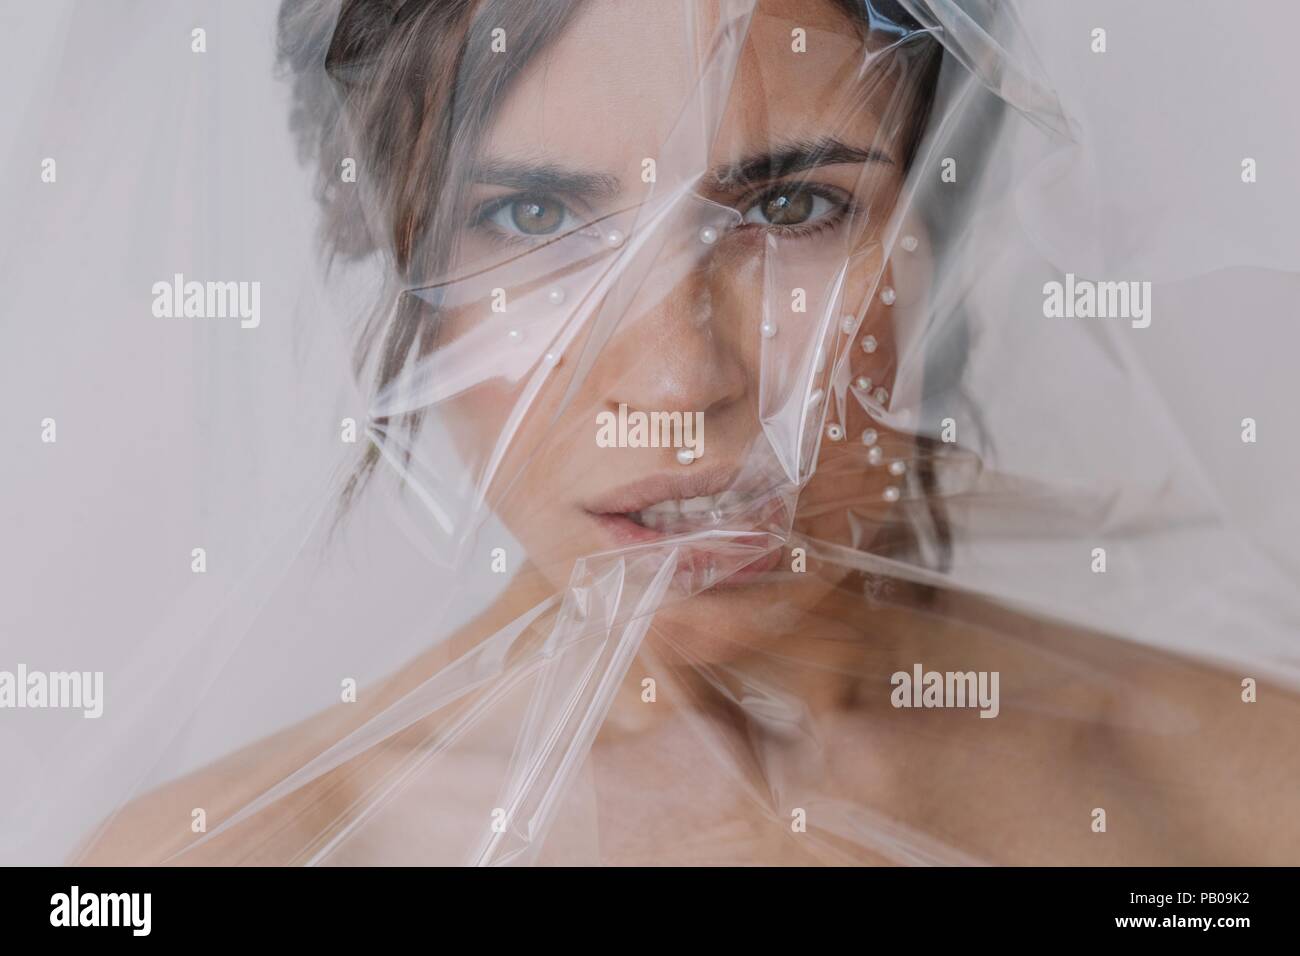 Portrait of a woman with pearls on her face wrapped in transparent plastic Stock Photo